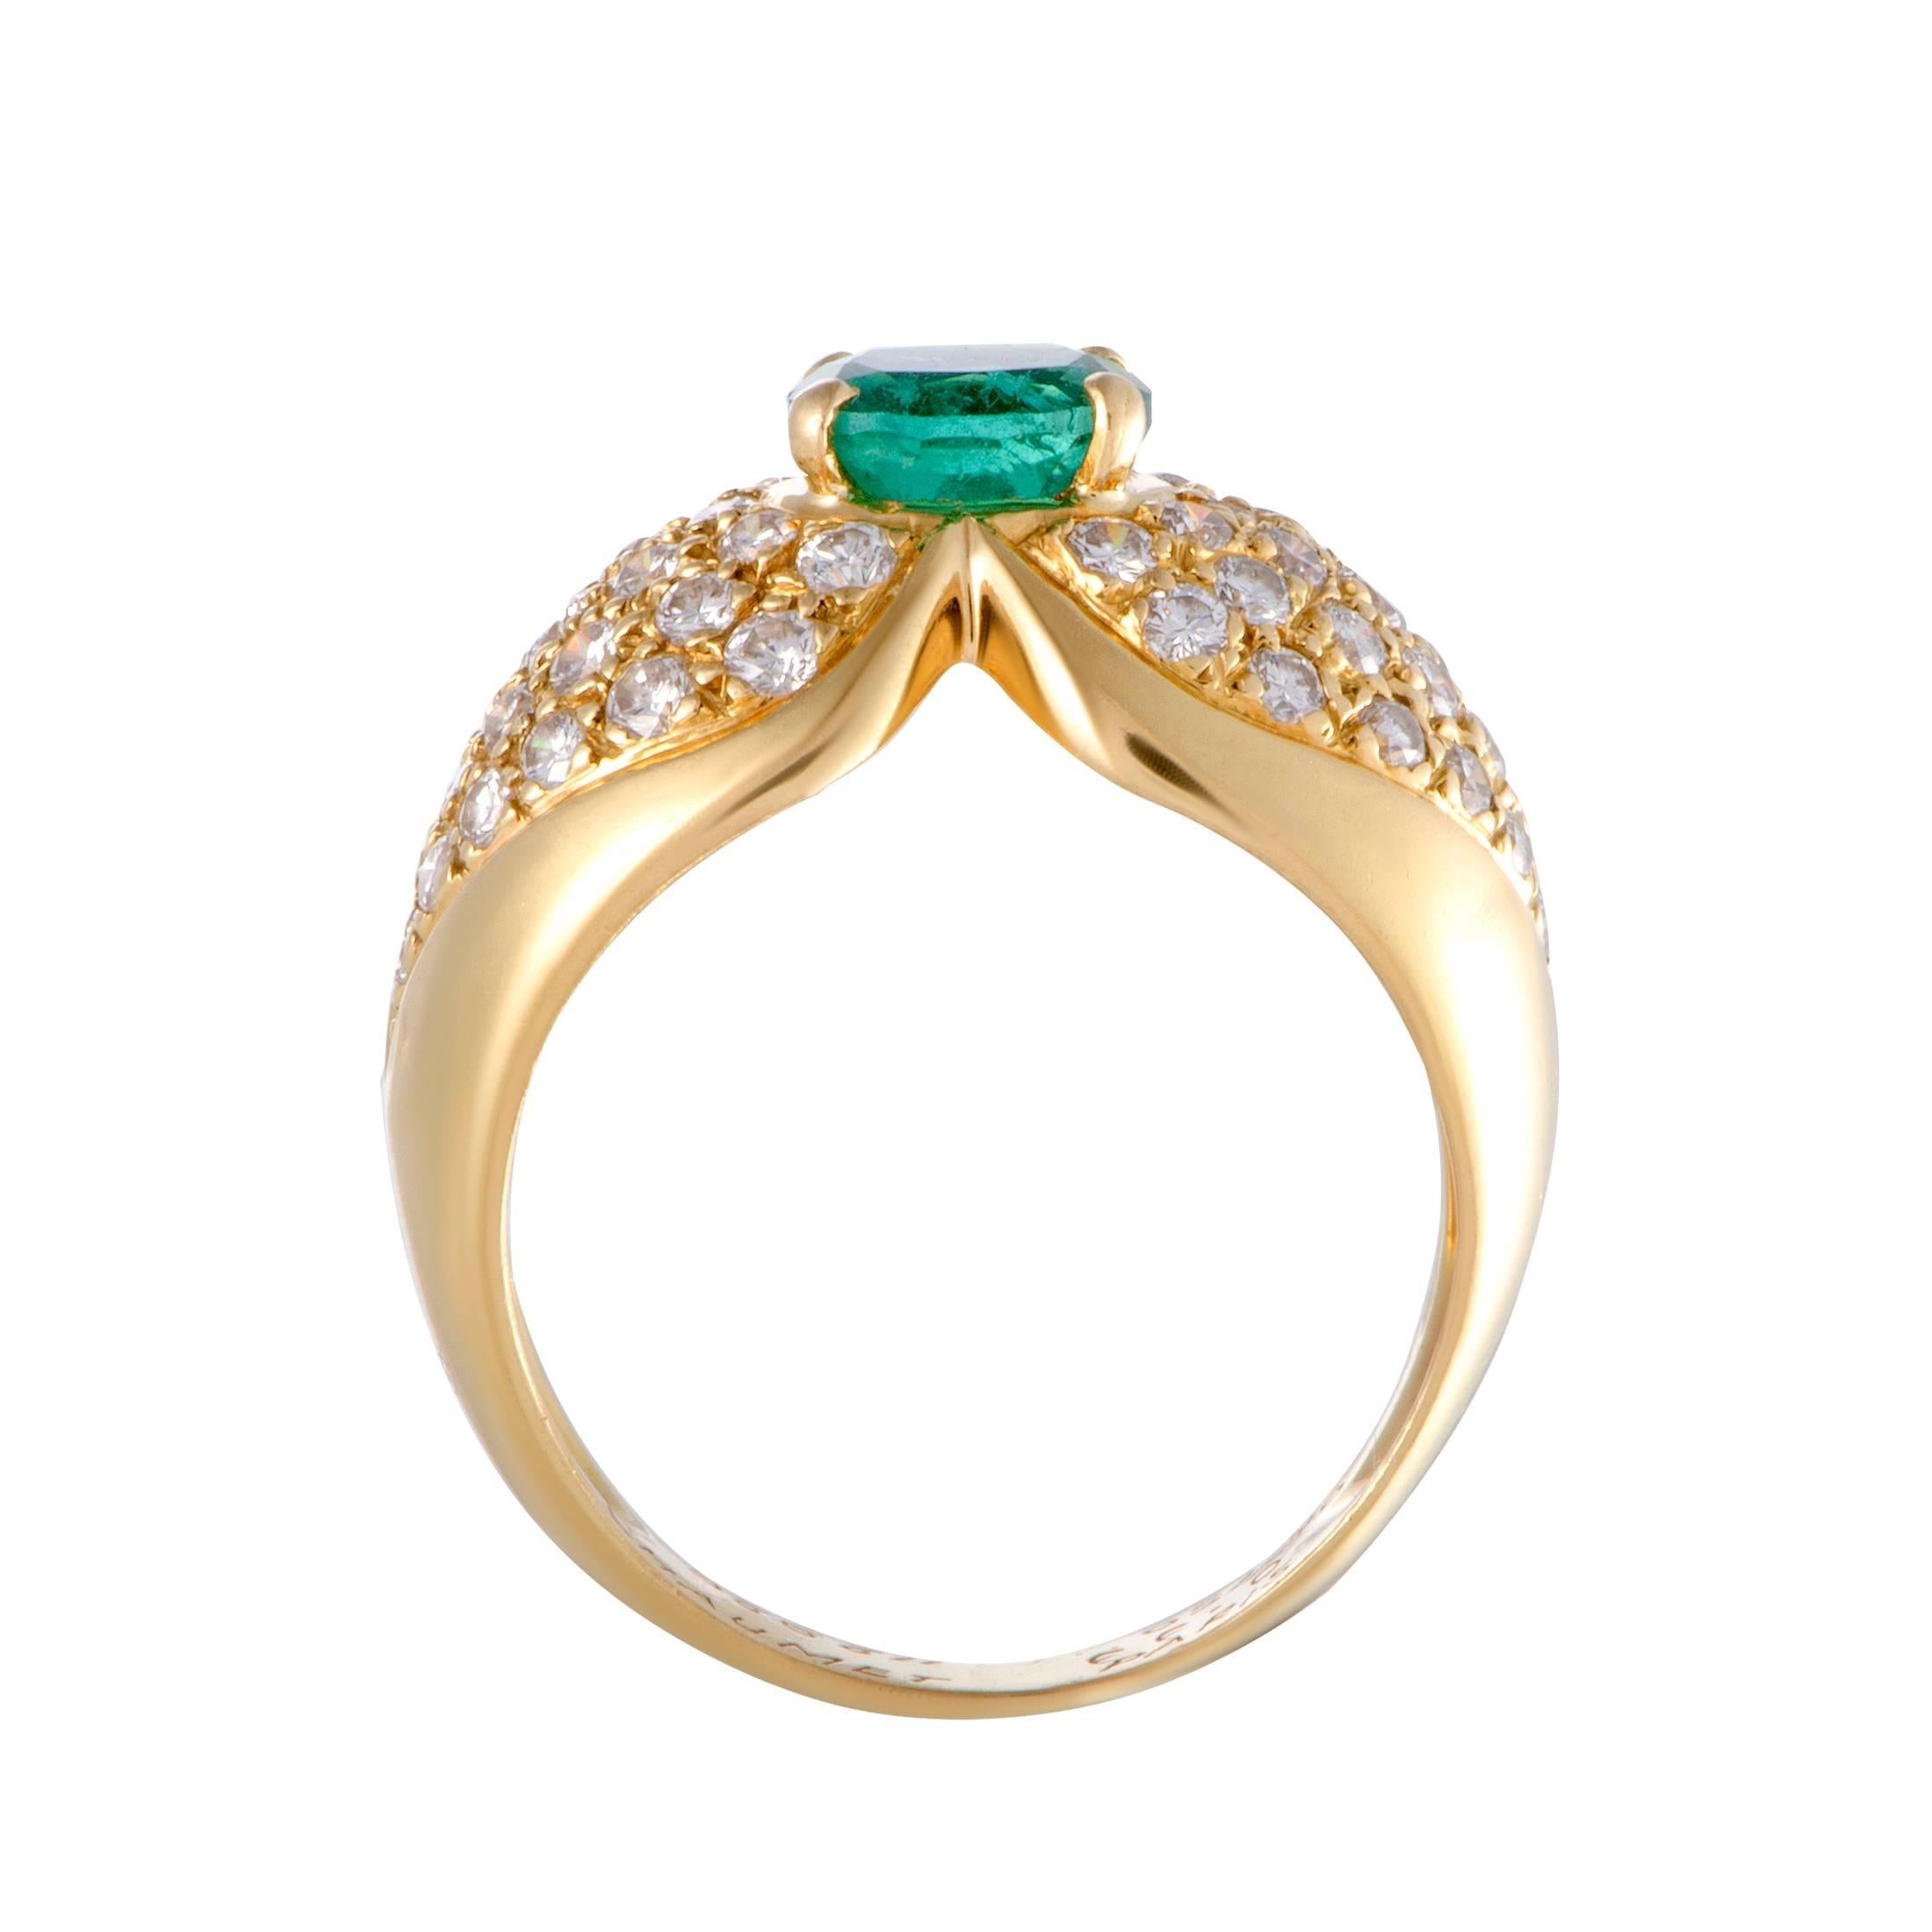 The regal allure of the emerald is splendidly complemented by the compellingly elegant design in this superb Chaumet ring. The ring is made of 18K yellow gold and set with 1.10 carats of diamonds, while the emerald weighs 0.99 carats.
Ring Top